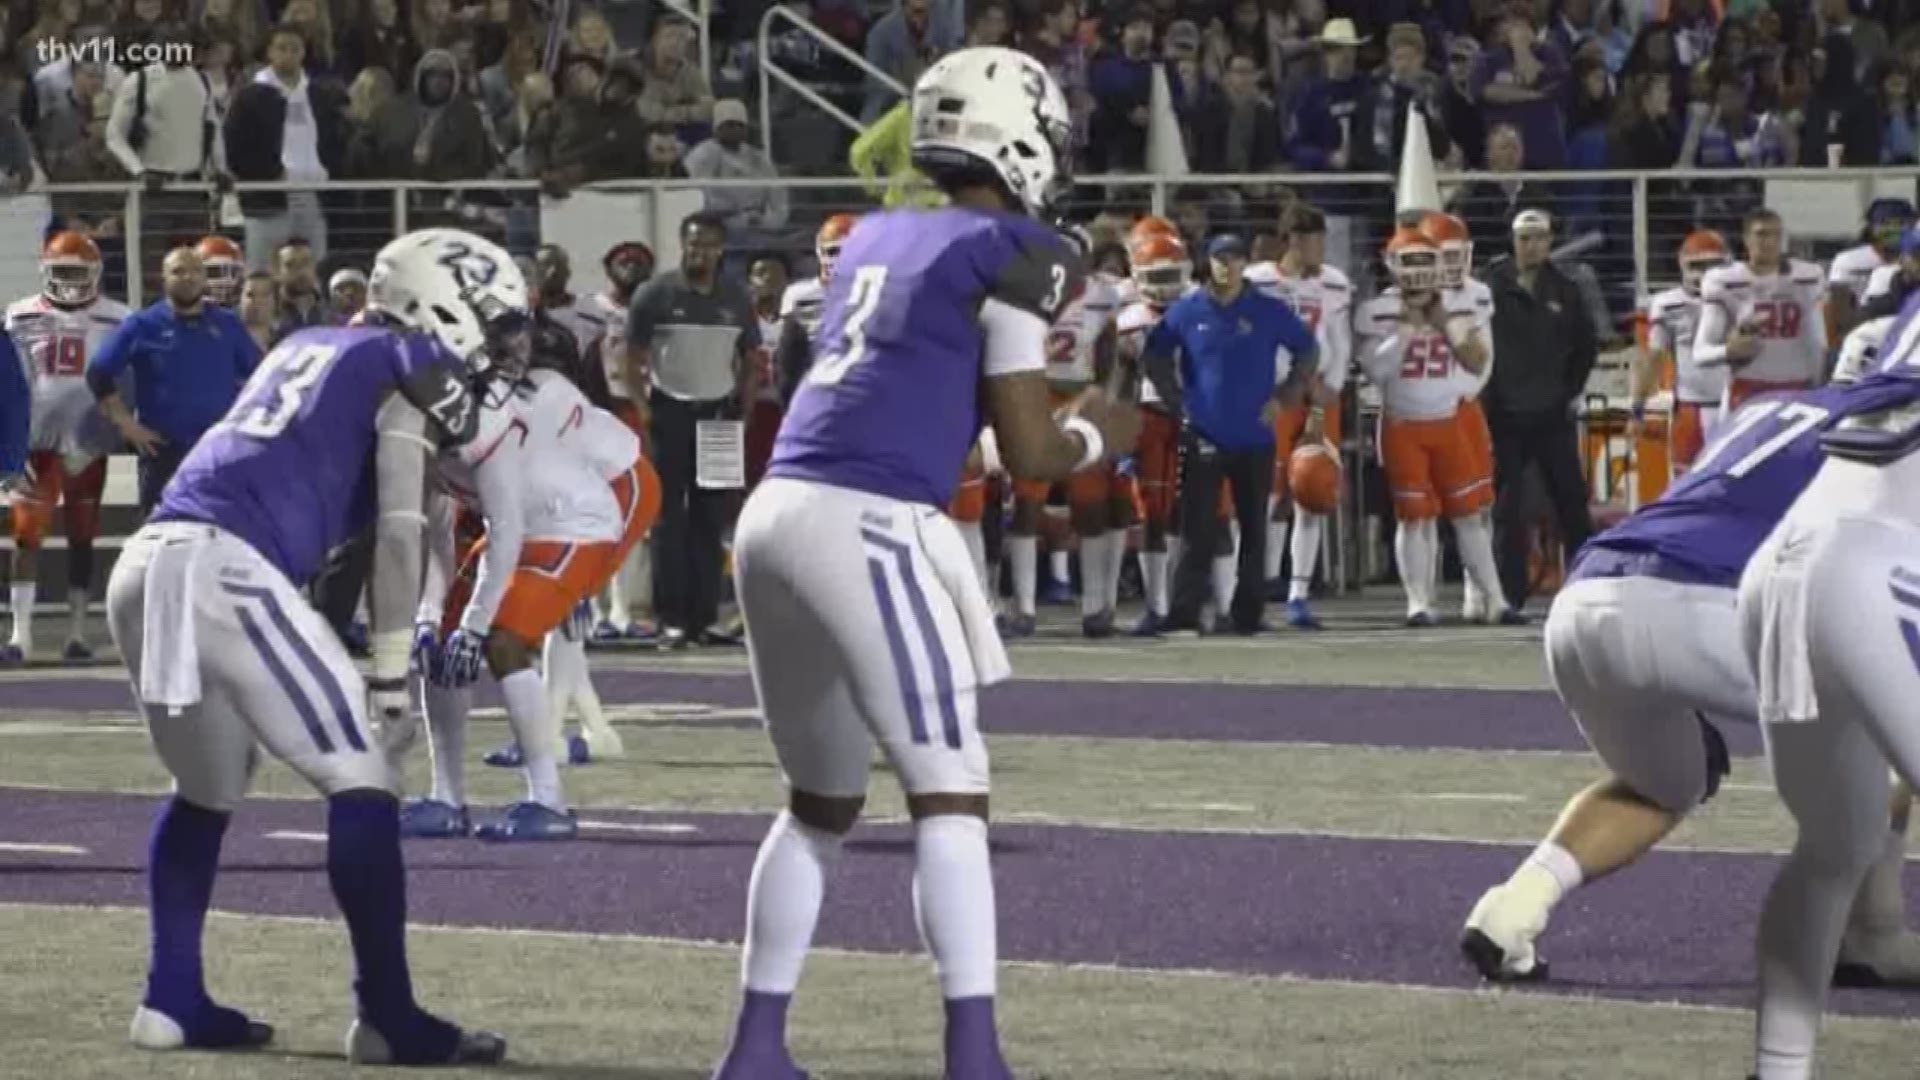 Central Arkansas scored four second half touchdowns and recovered a fumble on the final possession to seal the win